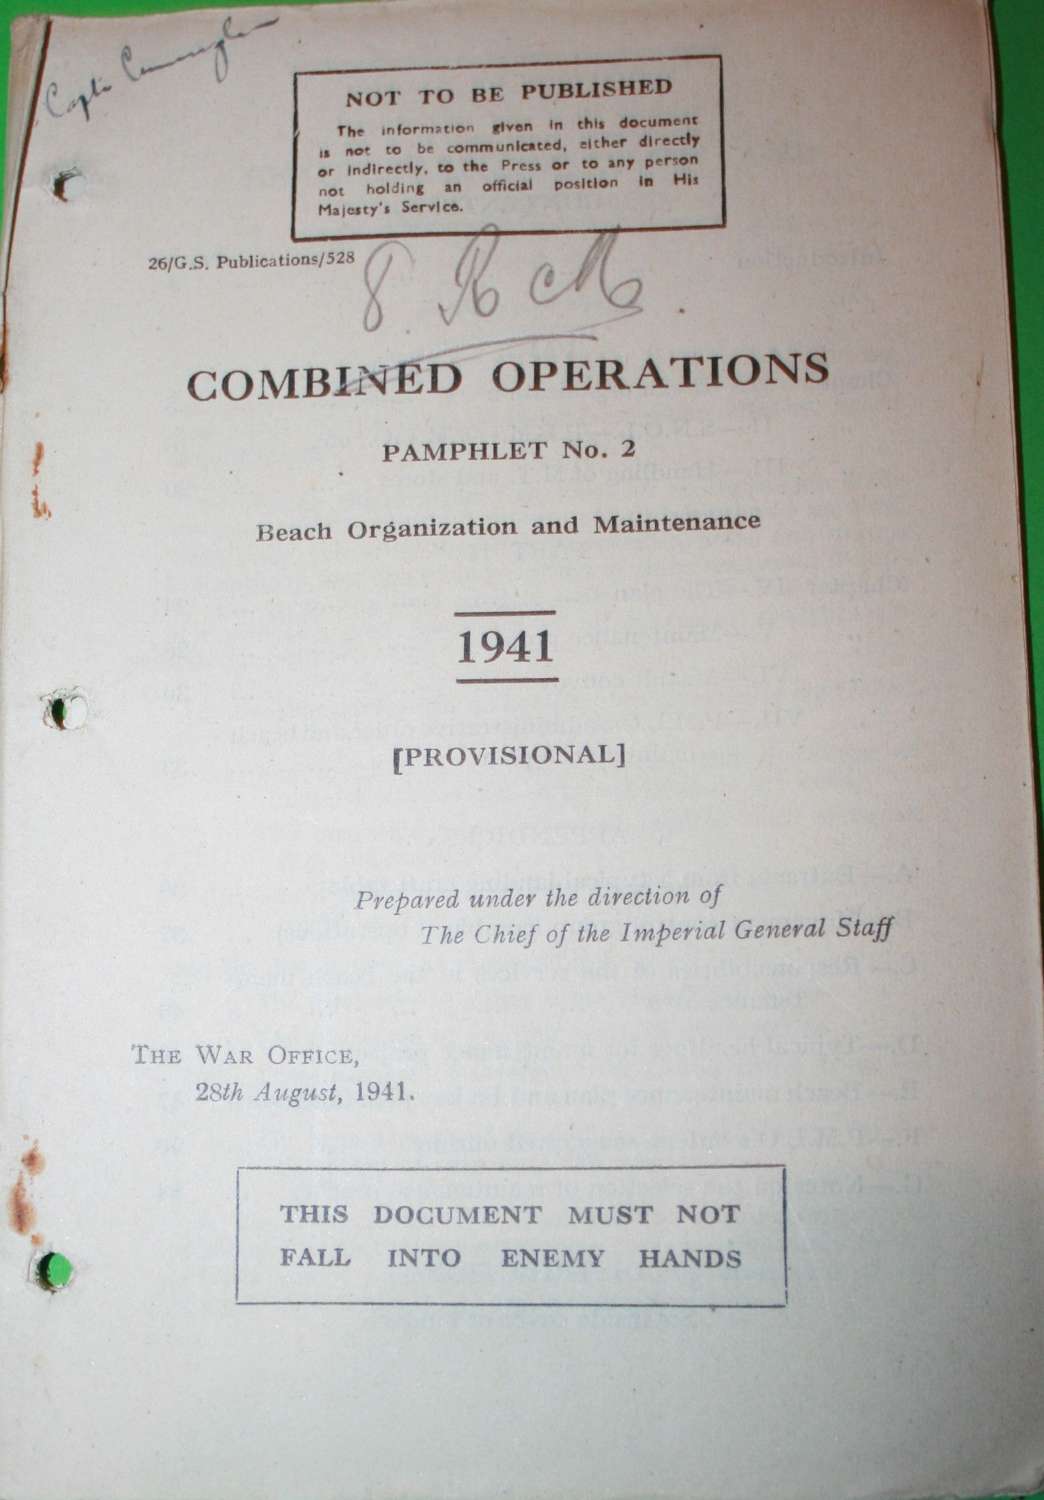 COMBINED OPERATIONS PAMPHLET NO 2 BEACH ORGANIZATION AND MAINTENANCE